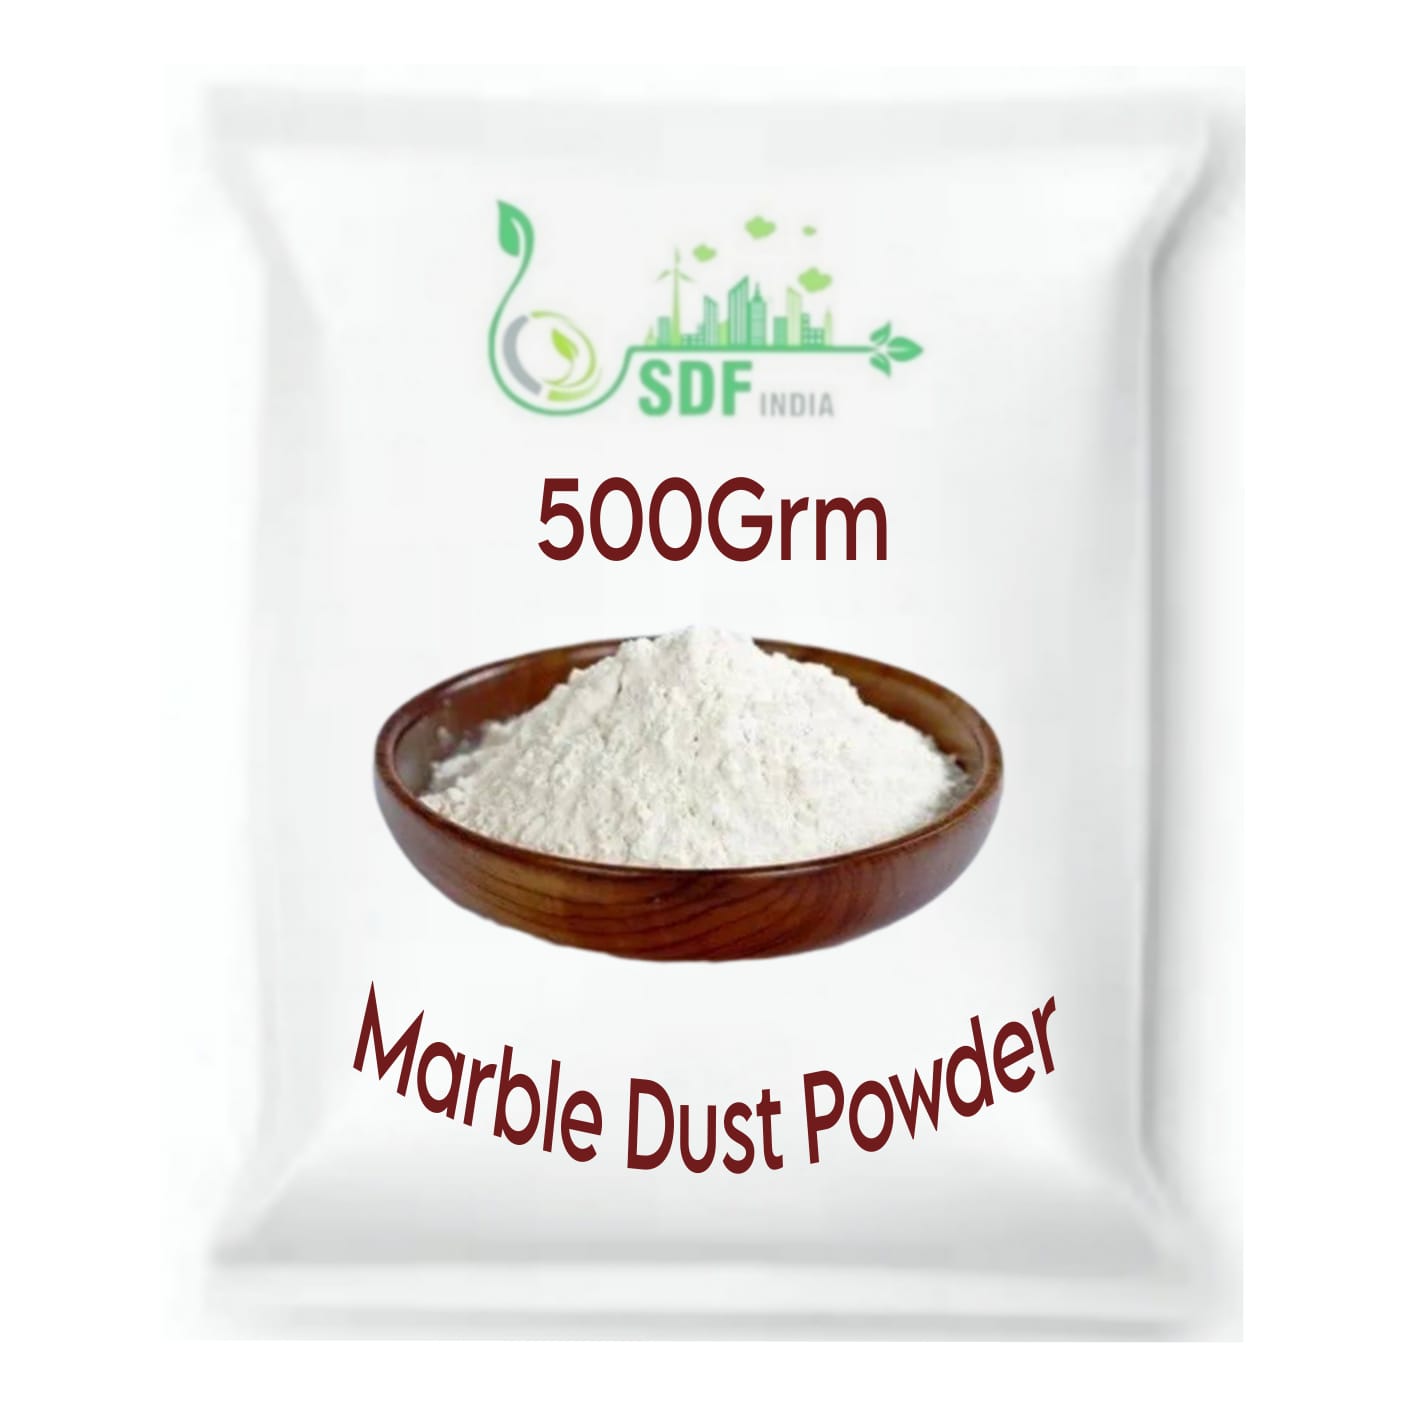 SDF INDIA Marble dust, White Marble Powder for Mural Art, Relief Painting, Raised Art, Persian Art, DIY, Gift for Artists, Students, Children & for All Arts (500Grm)